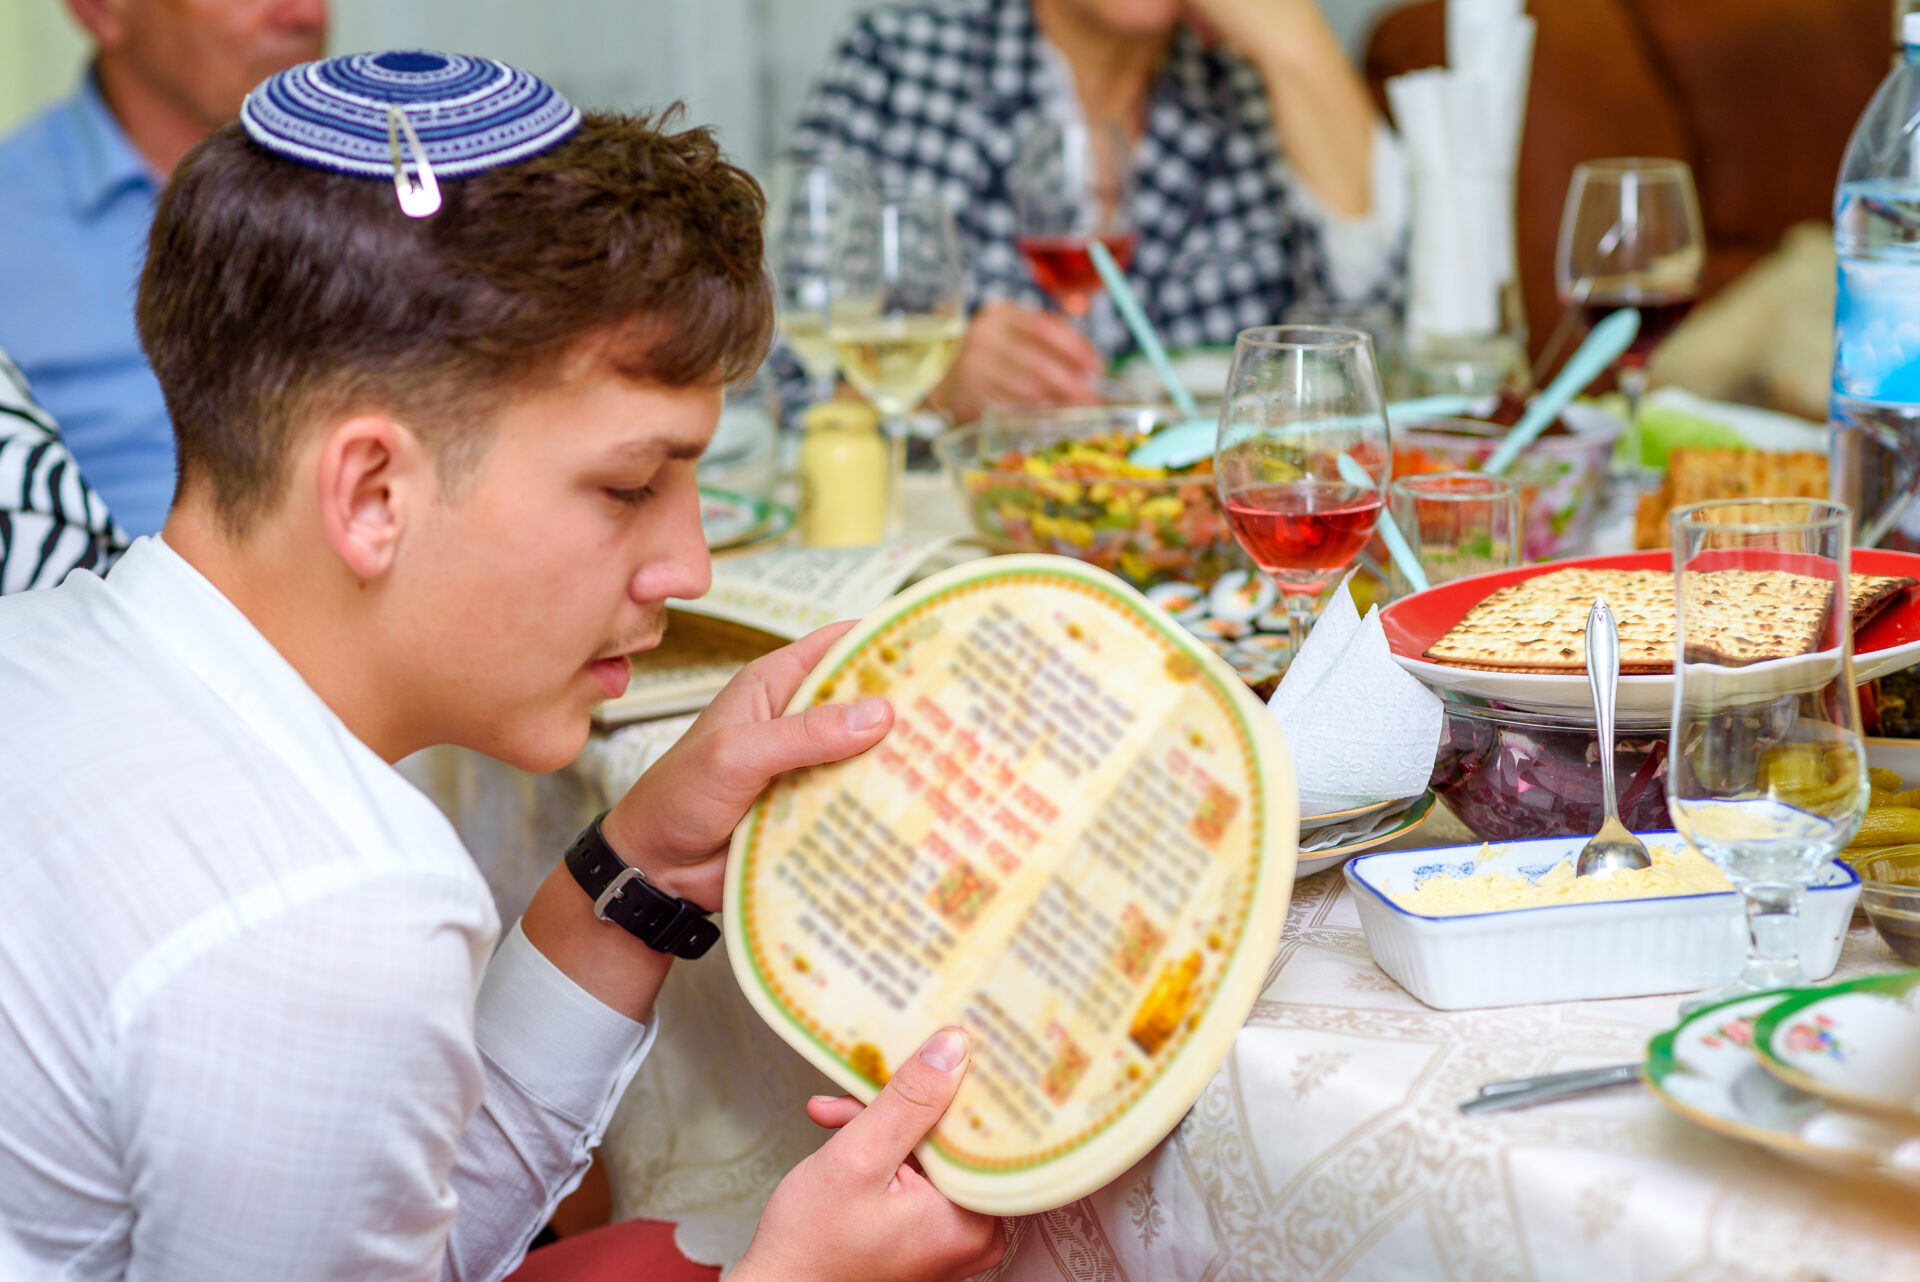 Rabbi Speaks On Passover, Current Events